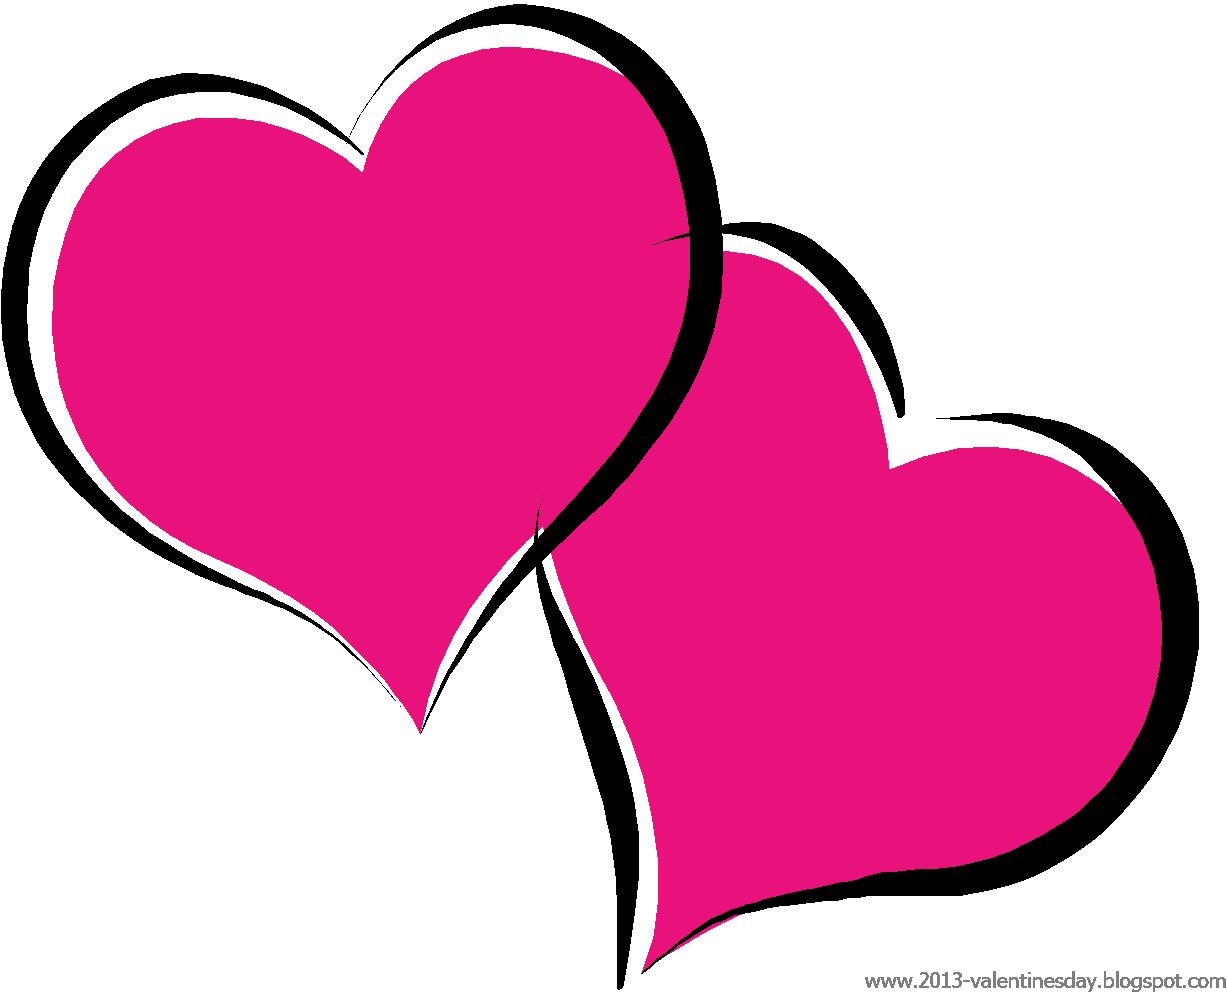 free clipart images love - photo #34